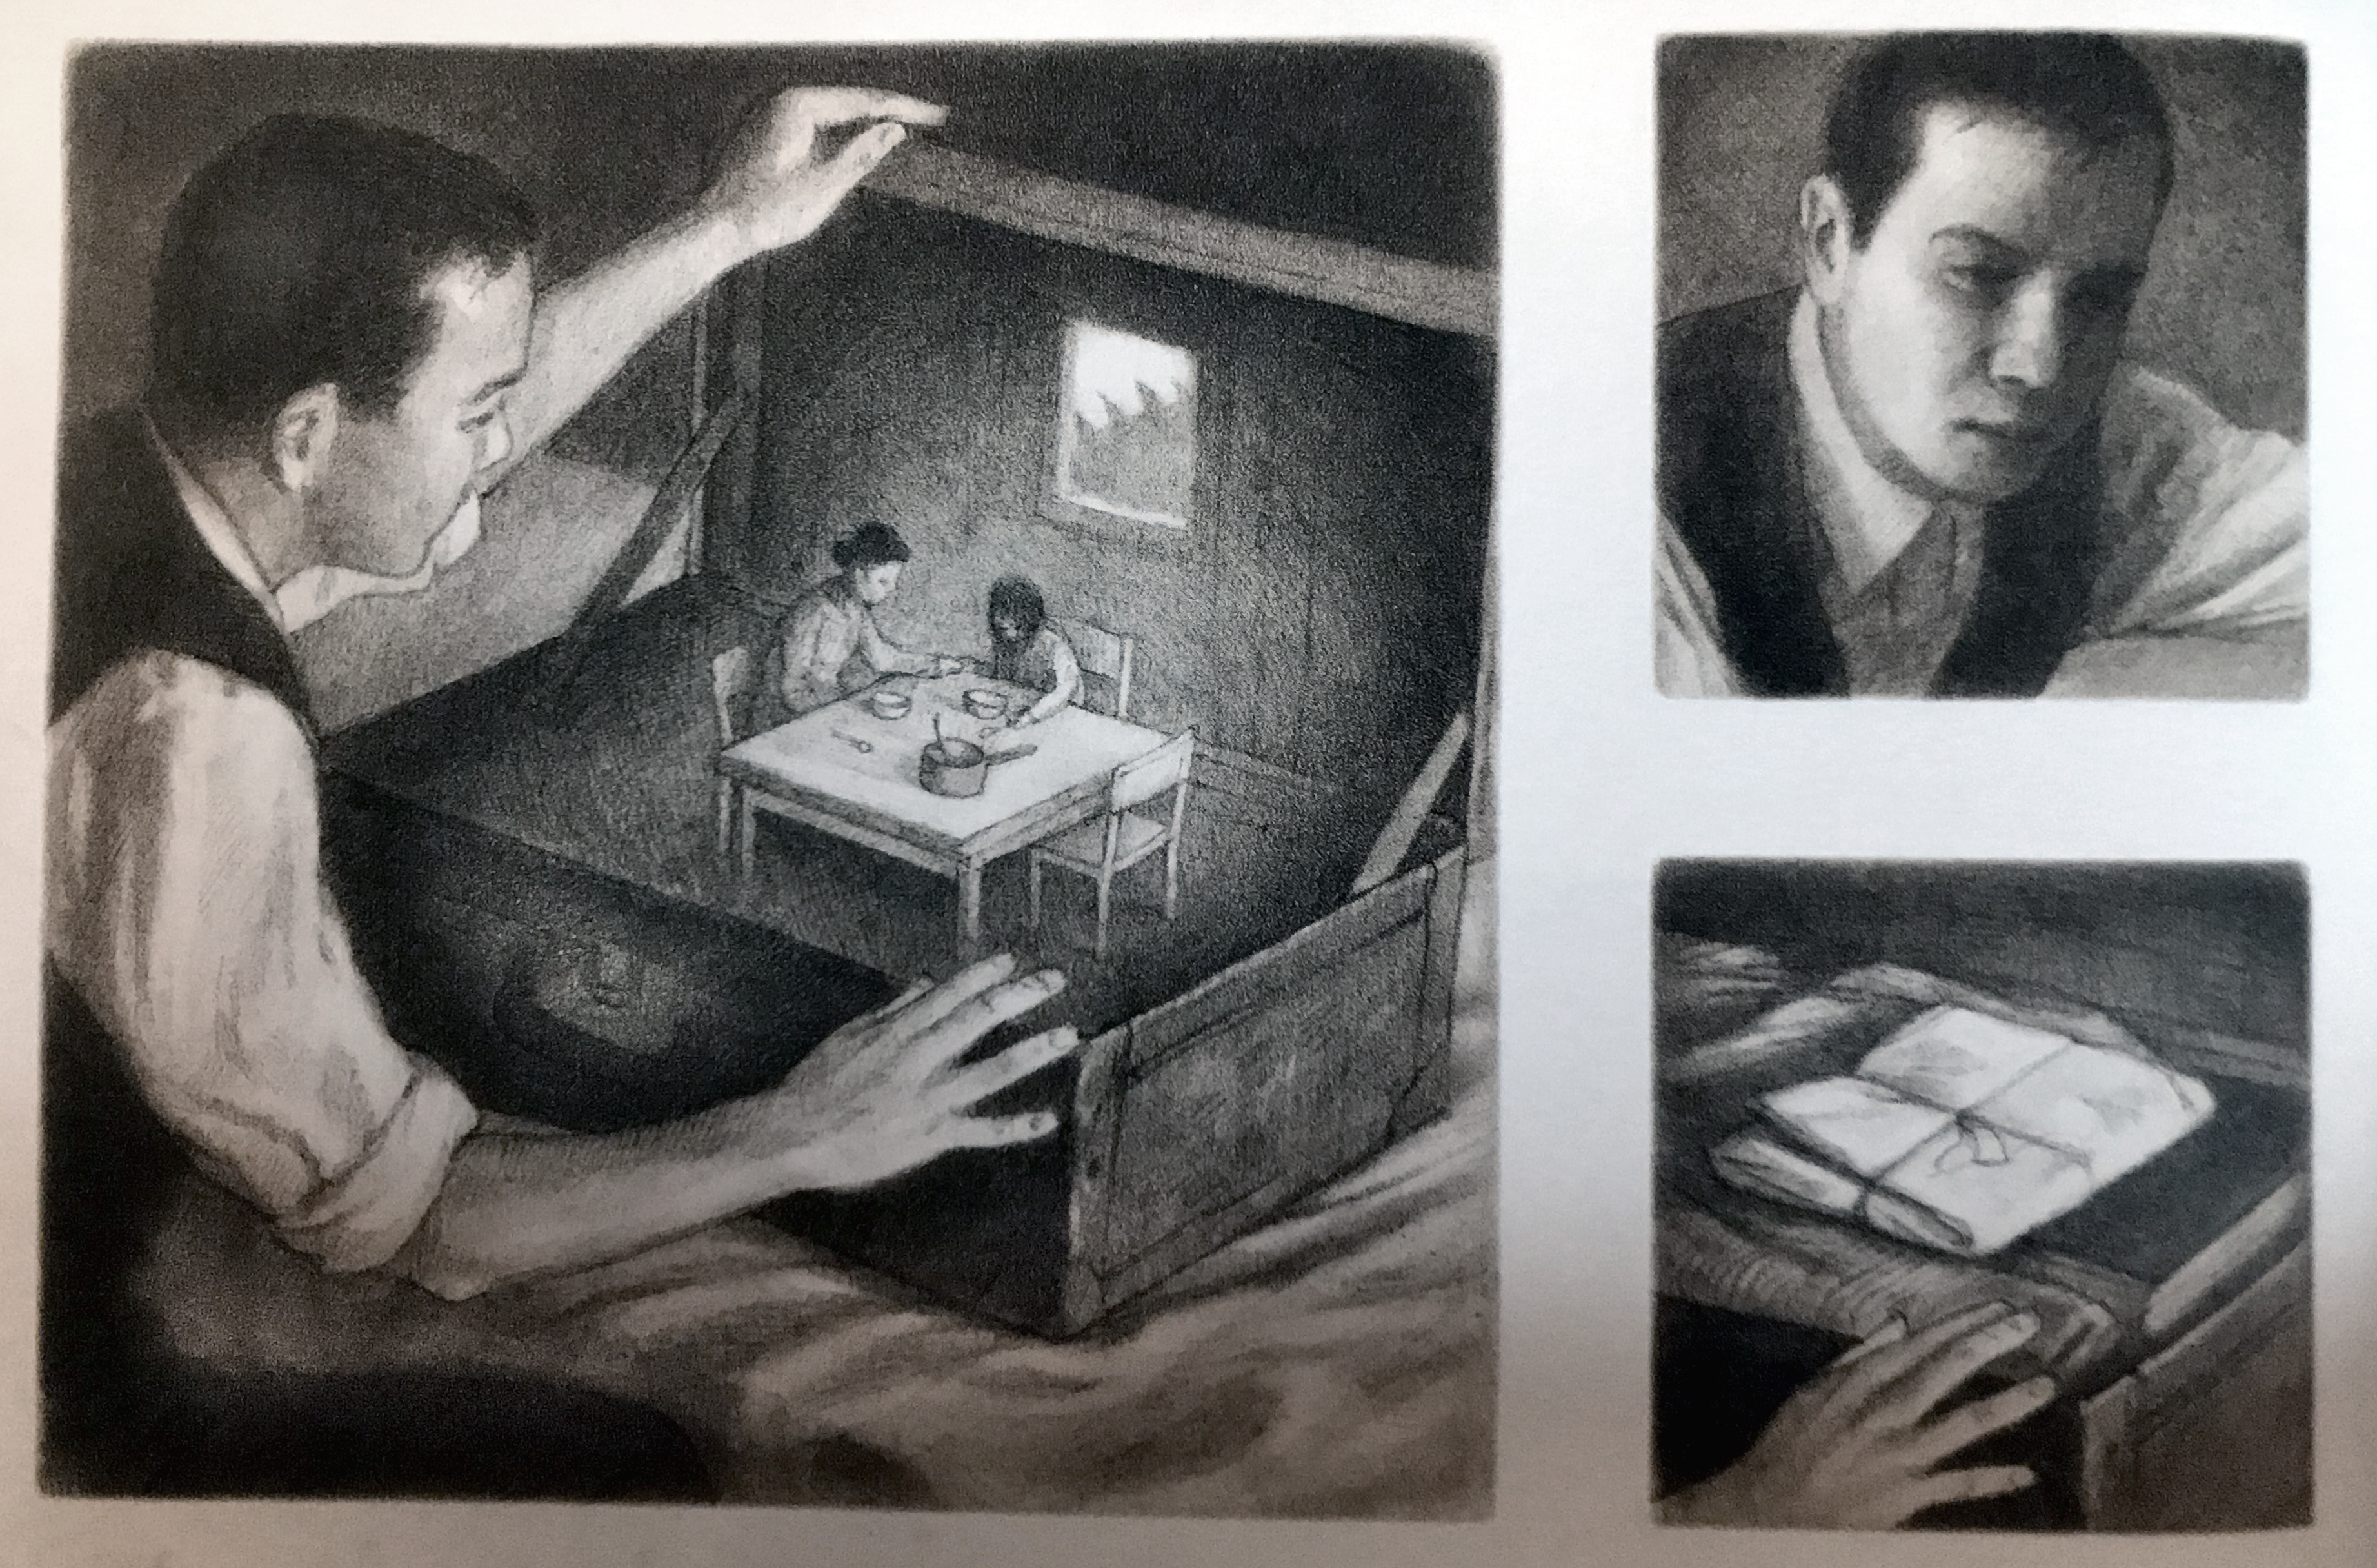 How to Tell a Story without Words: Time and Focalization in Shaun Tan’s The Arrival (2006)